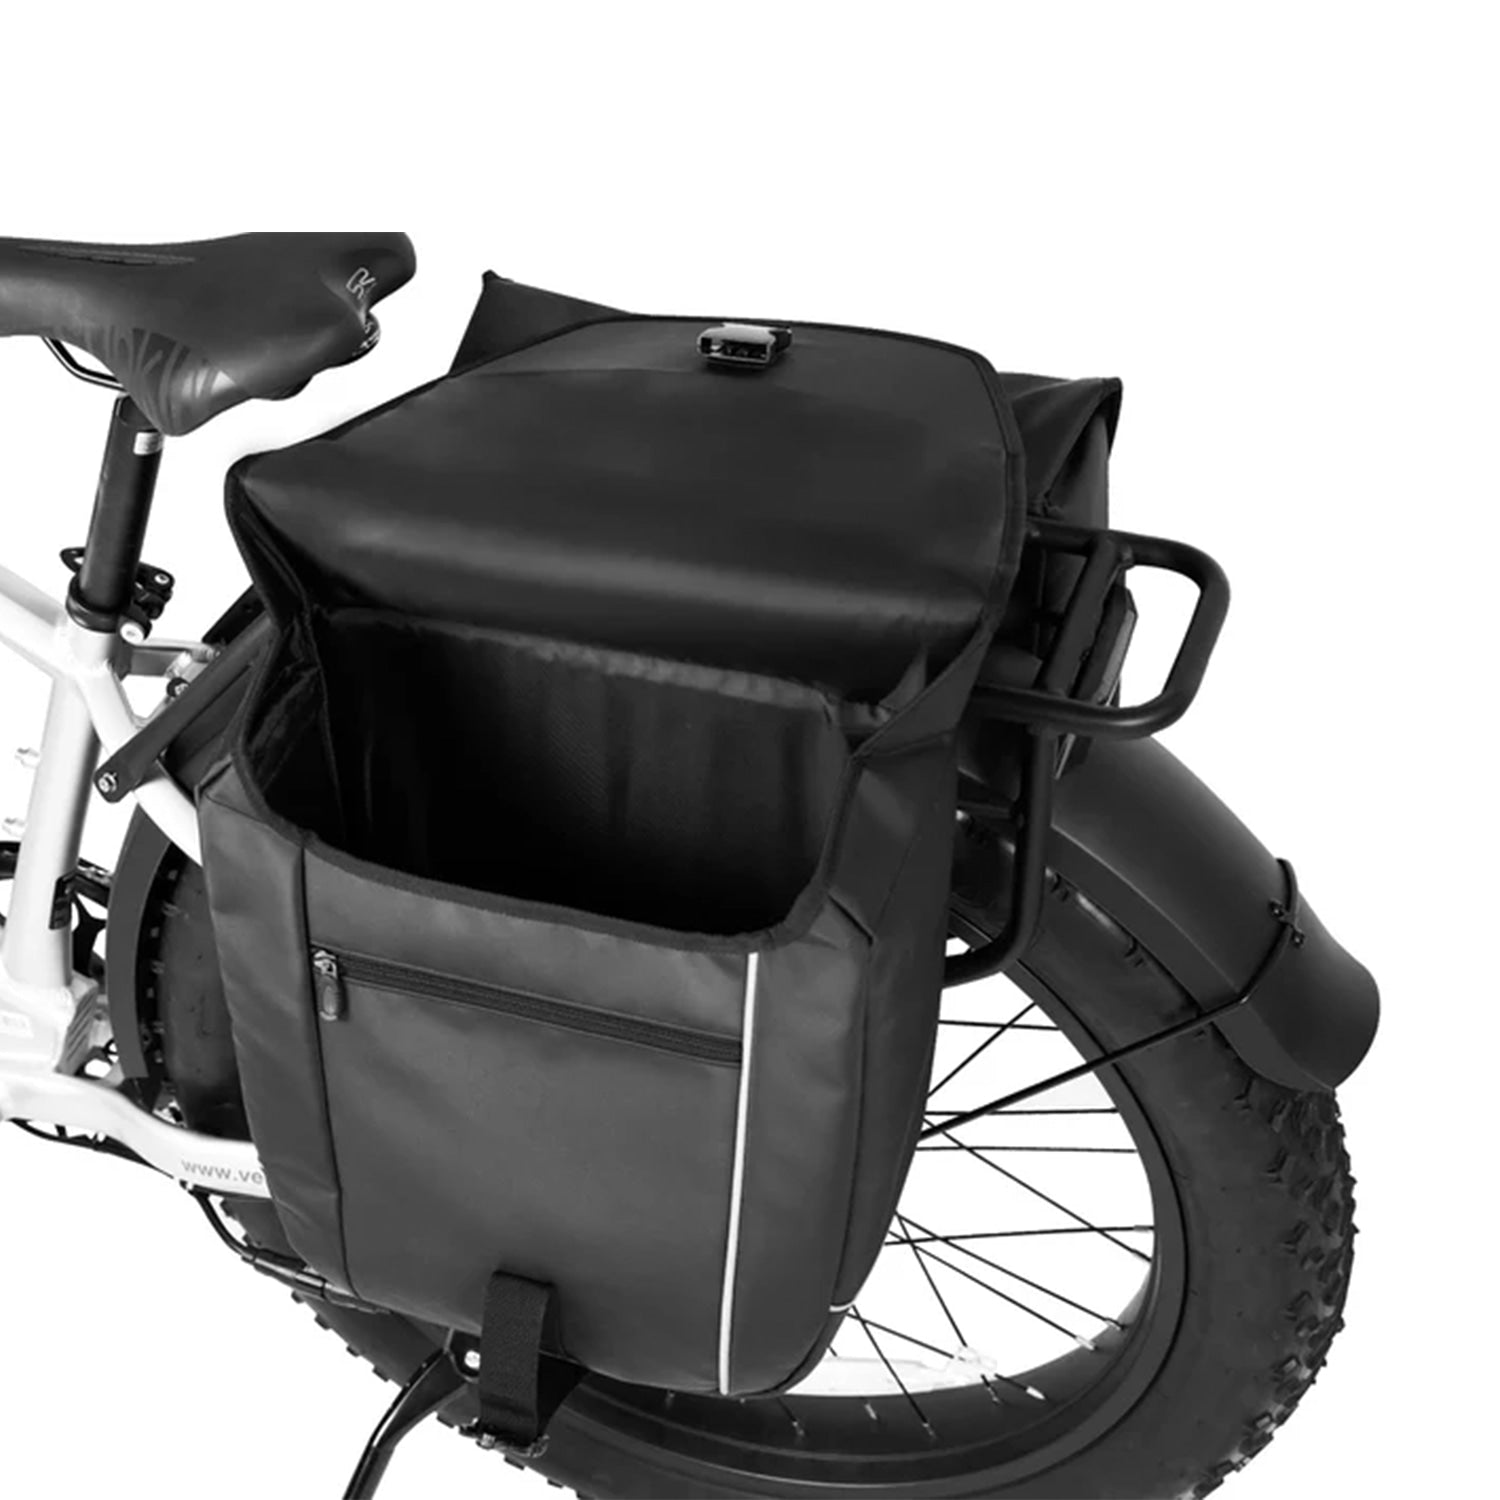 Waterproof Bicycle Pannier Bag with Rain Cover